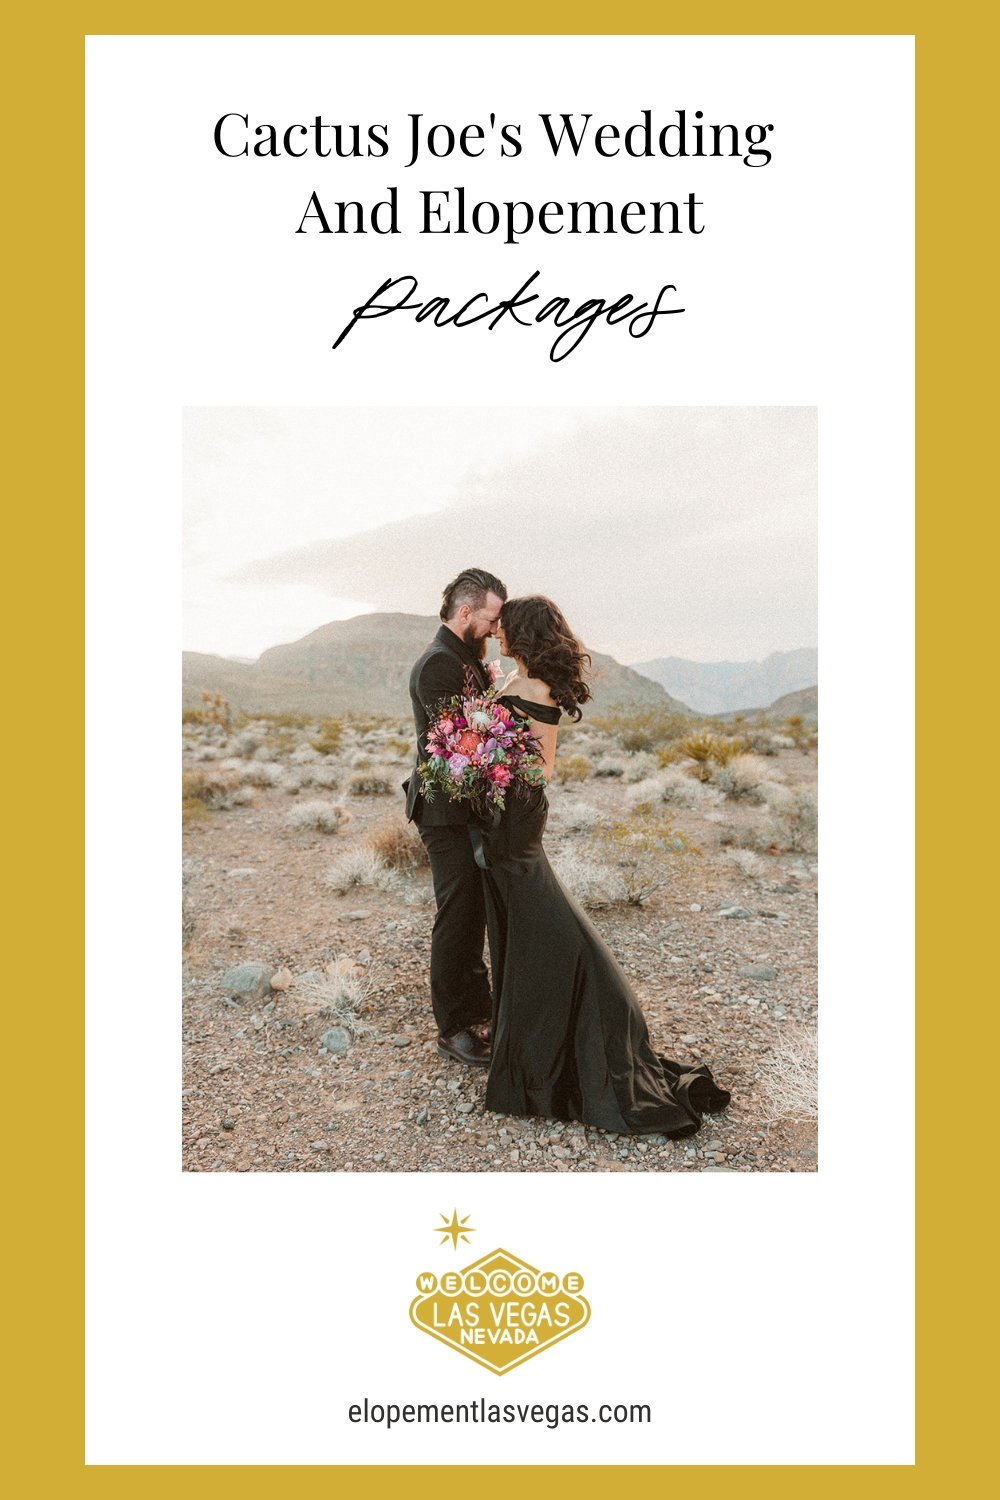 Bride and groom leaning in for a kiss during their black-themed elopement; image overlaid with text that reads Cactus Joe's Wedding and Elopement Packages